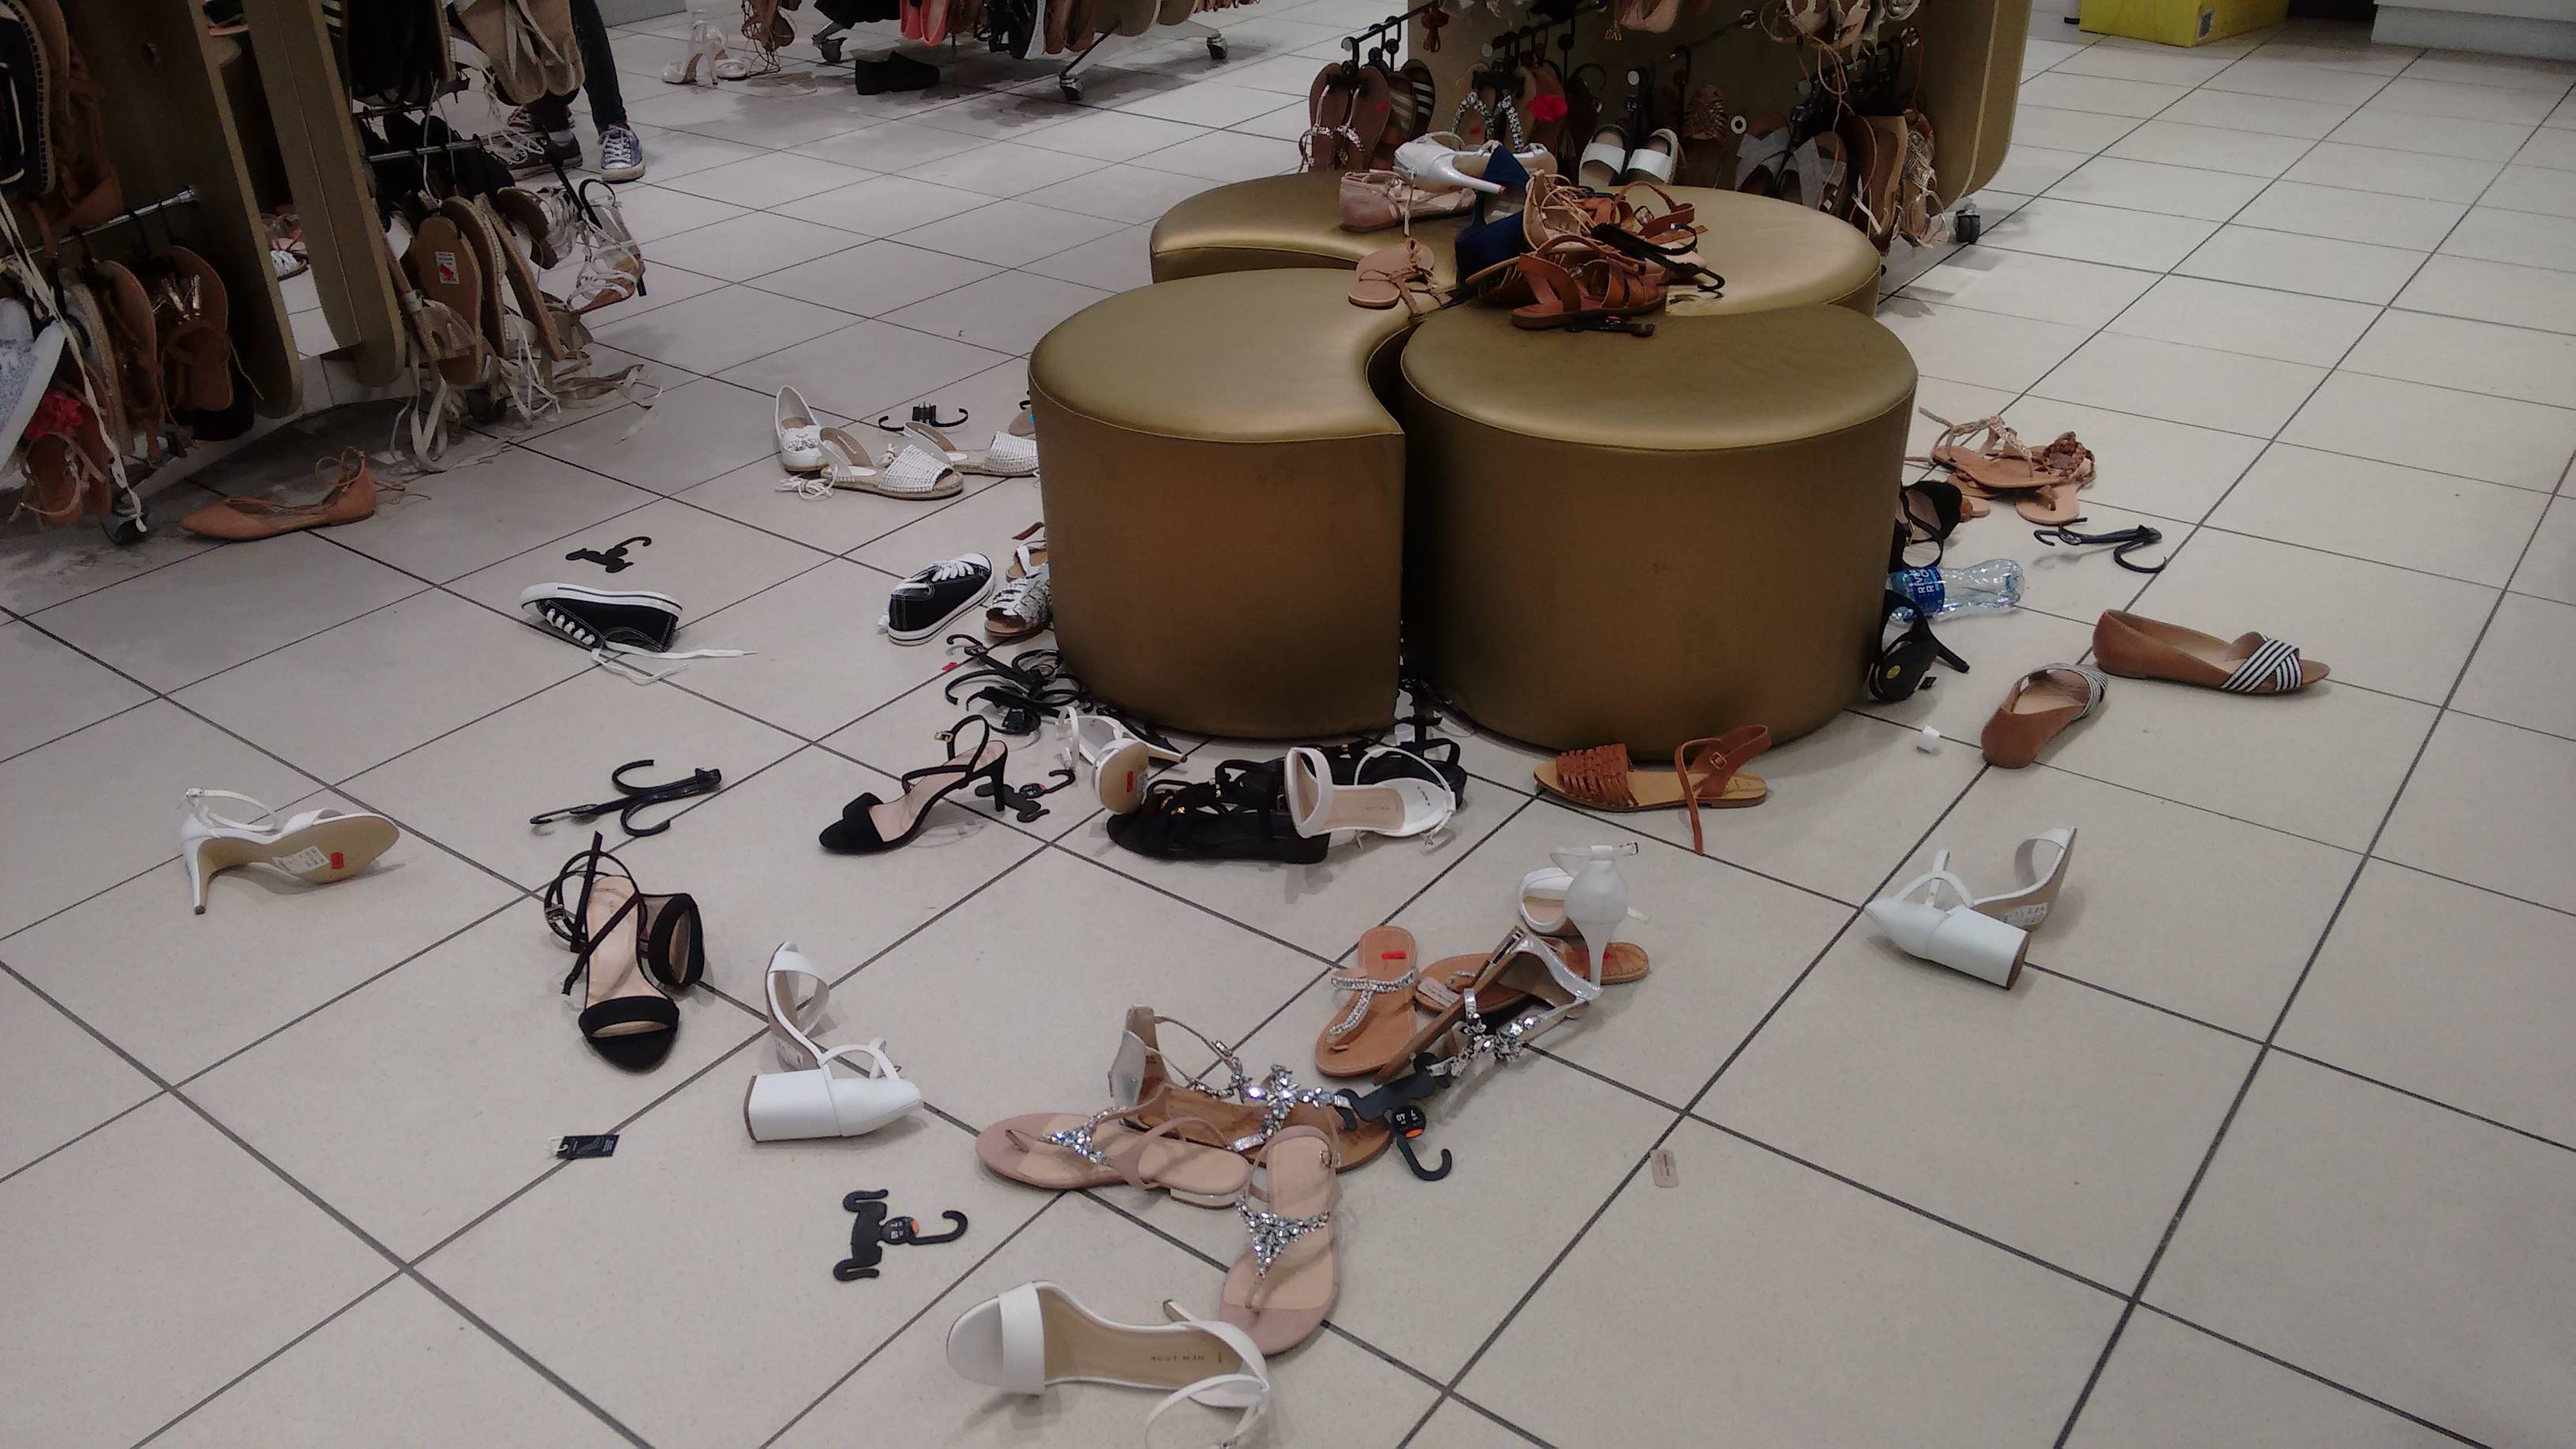 Mess of woman's shoes on the floor